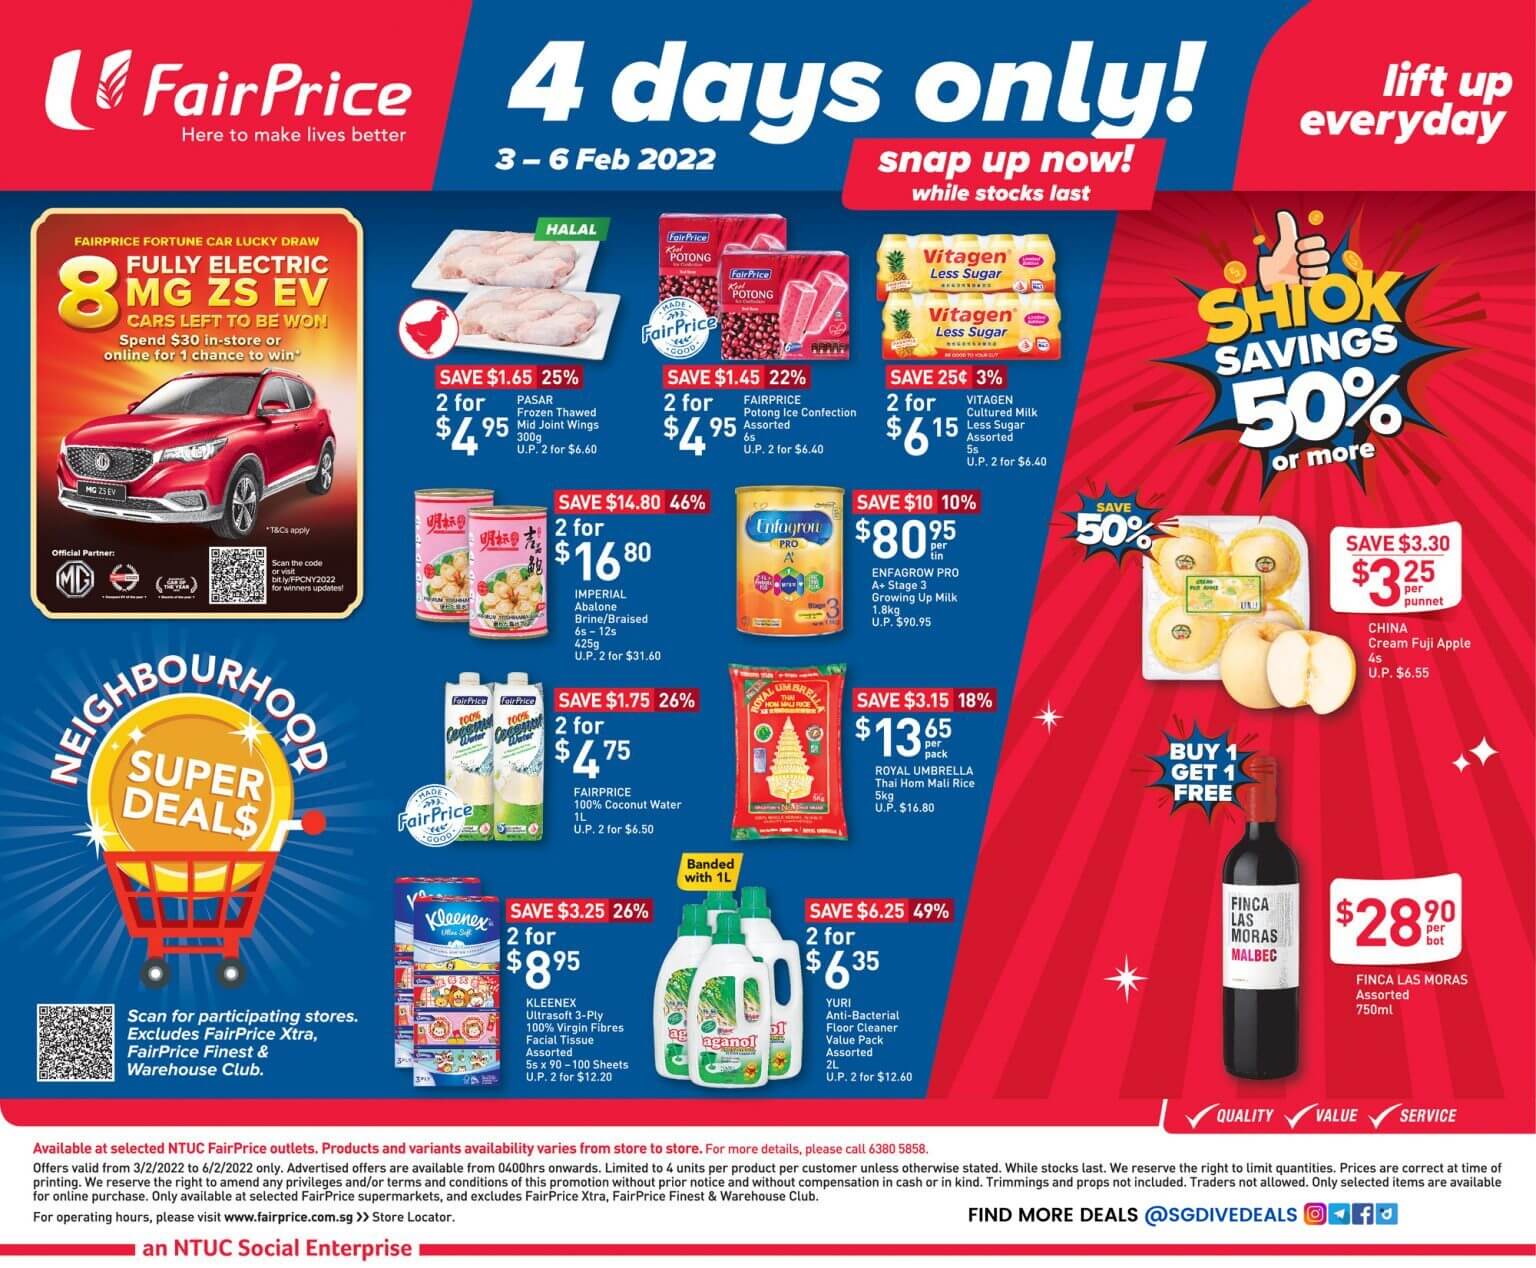 NTUC FairPrice,4 days only shiok savings 50% or more!